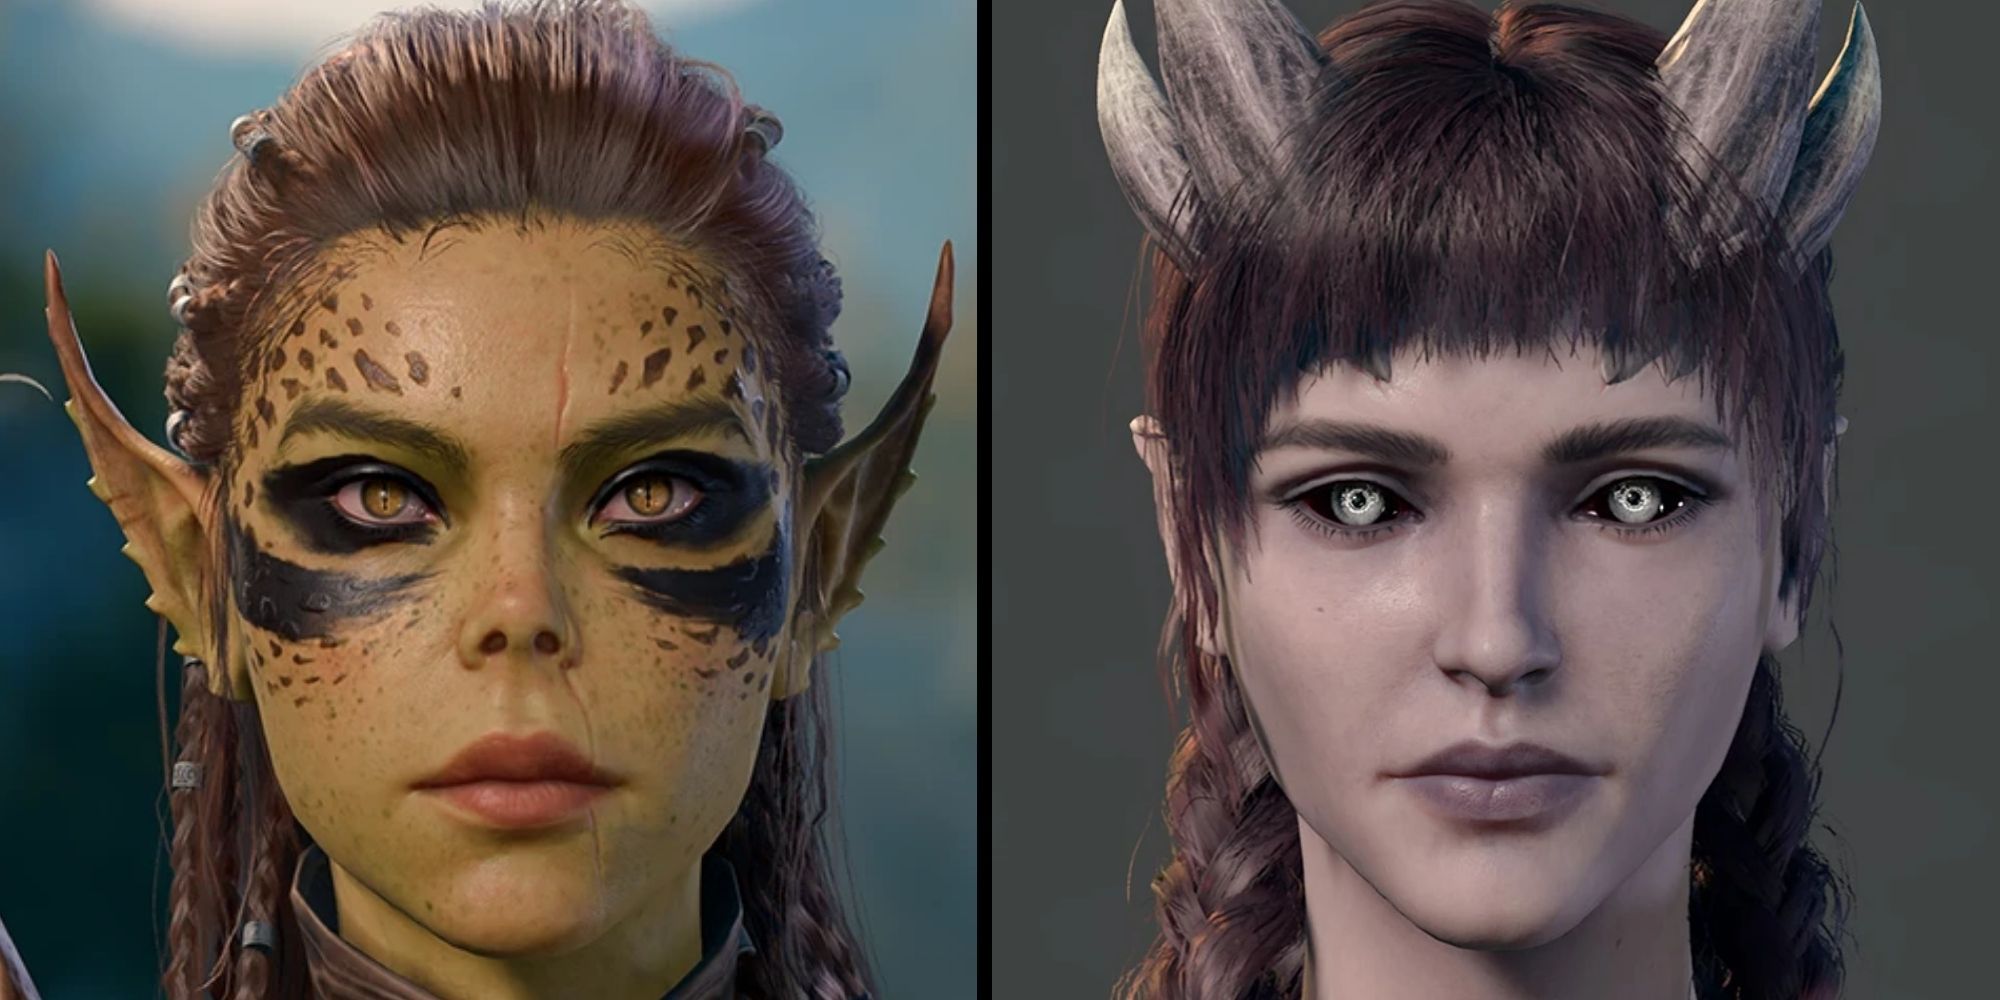 Baldur's Gate 3 Mods That 'Glow Up' Faces Are My Pet Peeve